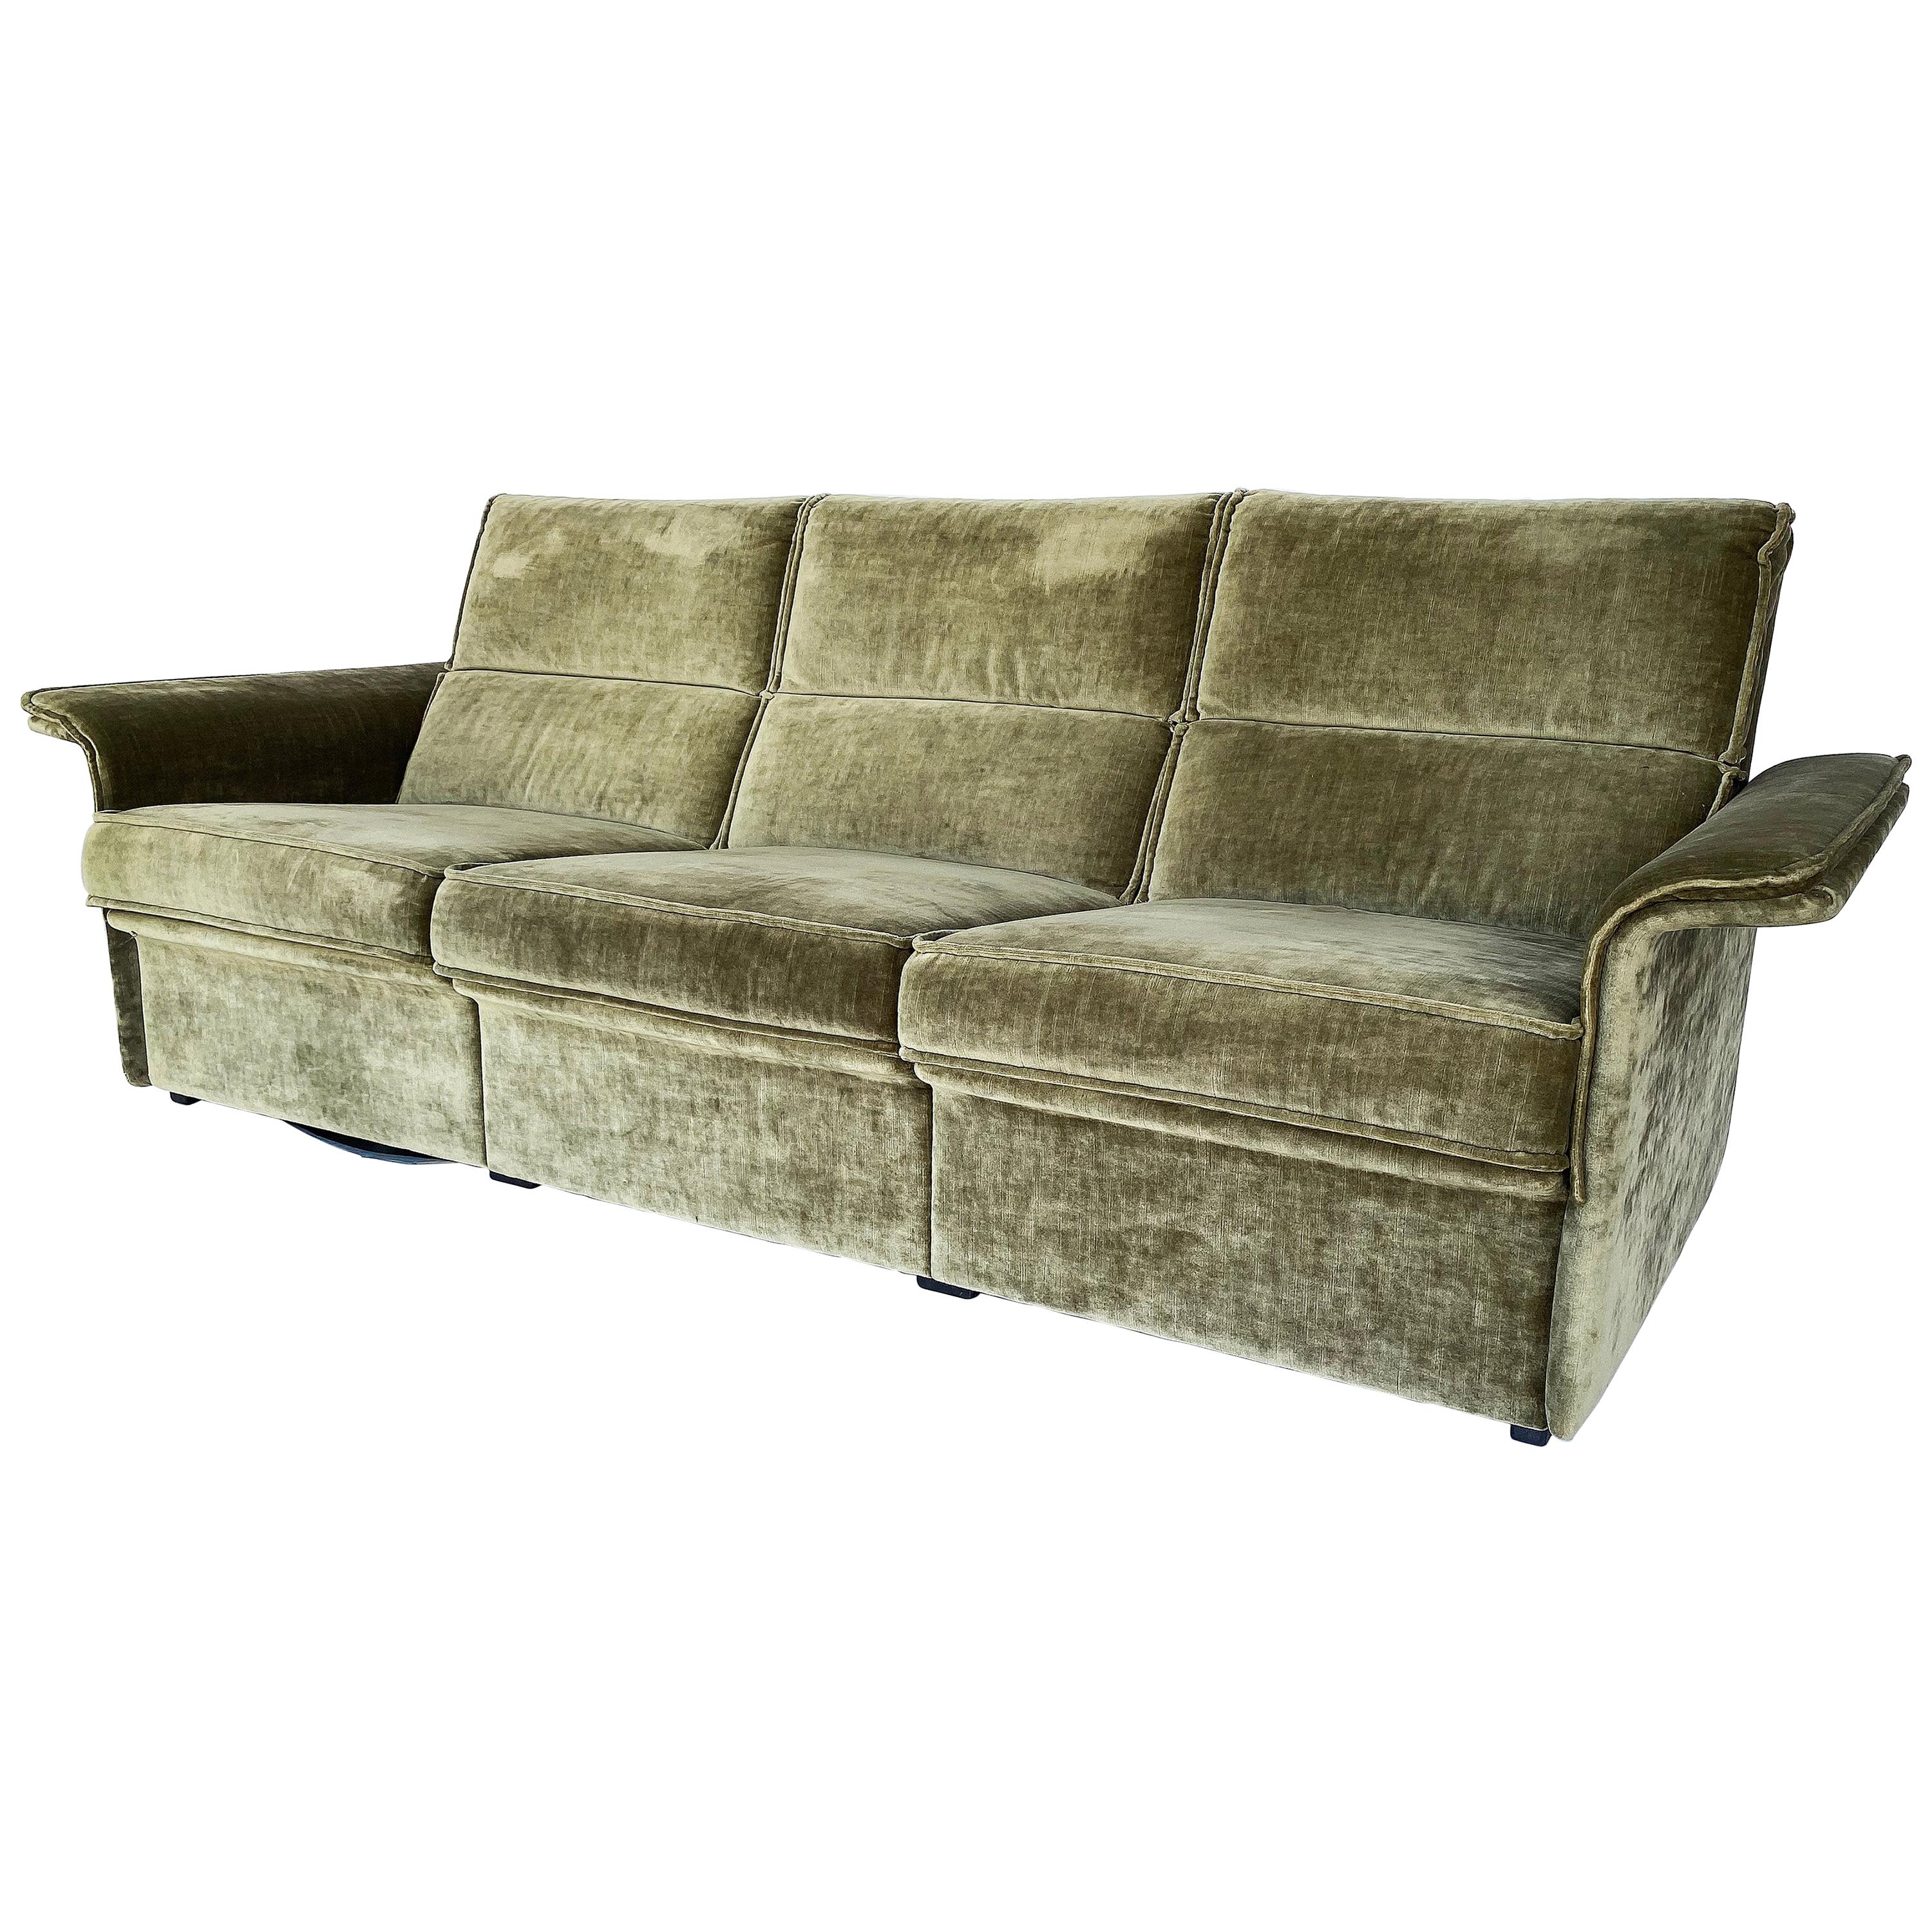 German Midcentury Sofa with Wing Arms and Mohair Velvet Upholstery by COR